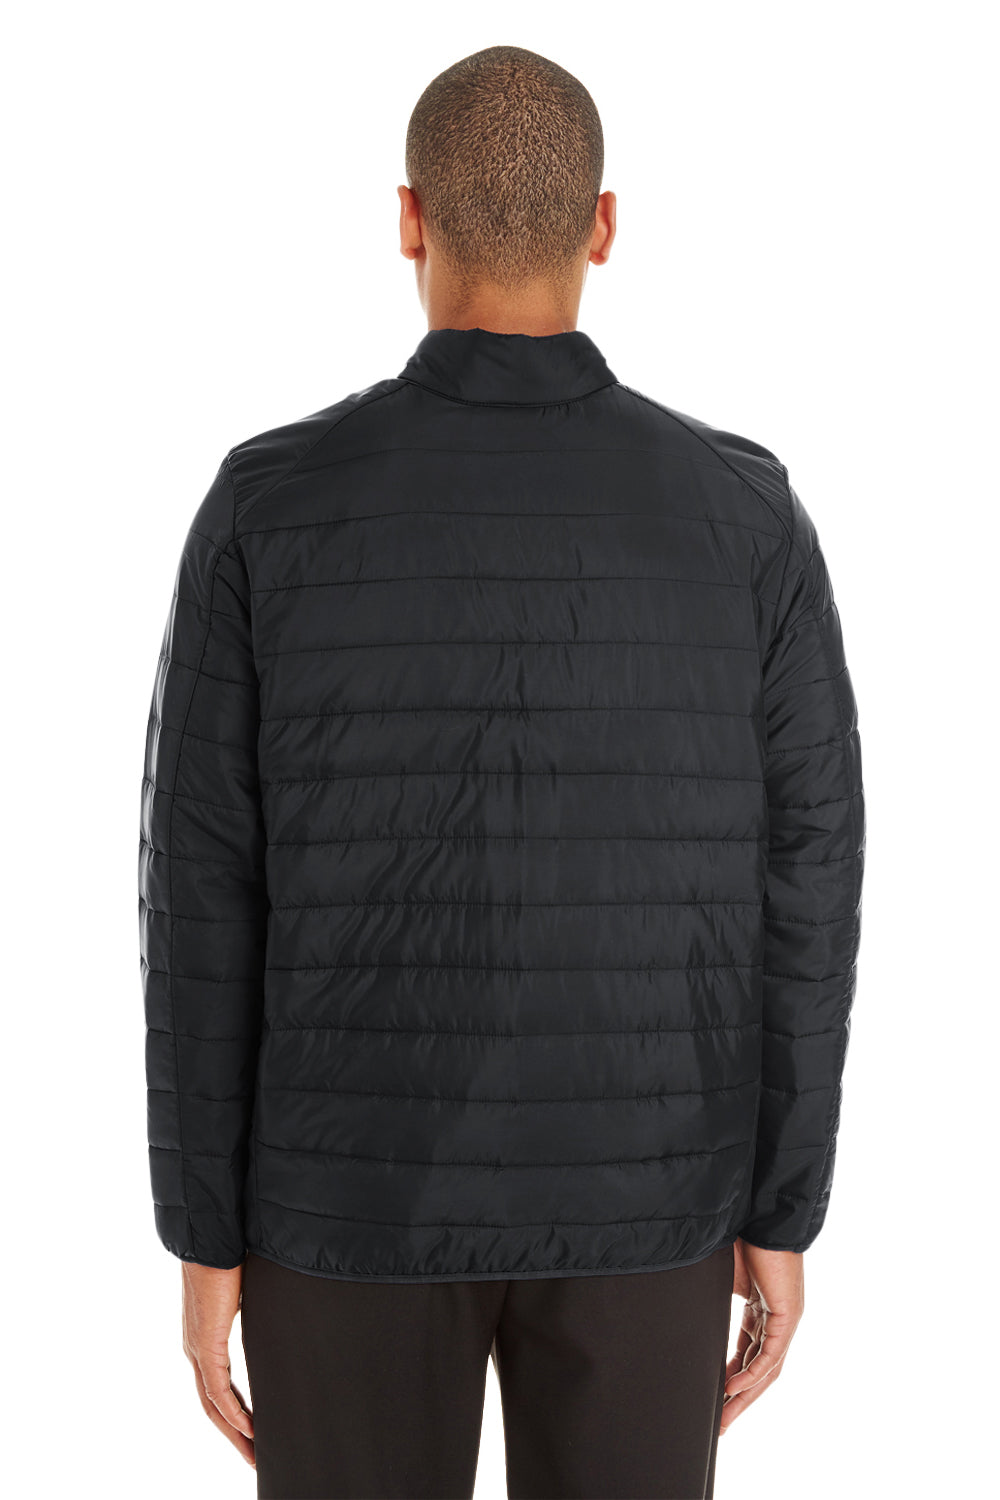 Core 365 CE700 Mens Prevail Packable Puffer Water Resistant Full Zip Jacket Black Back